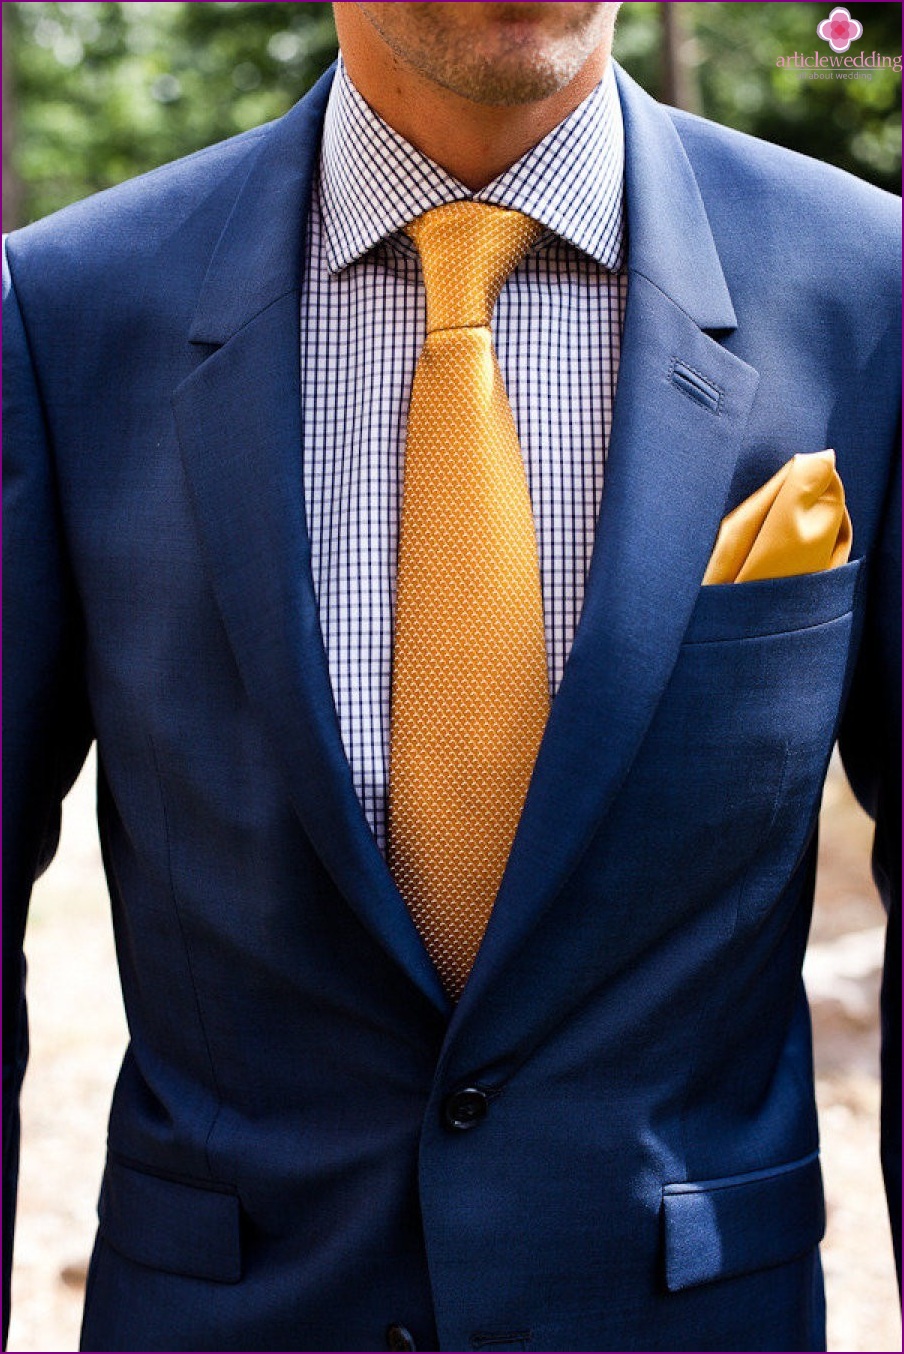 The image of the groom in blue and gold